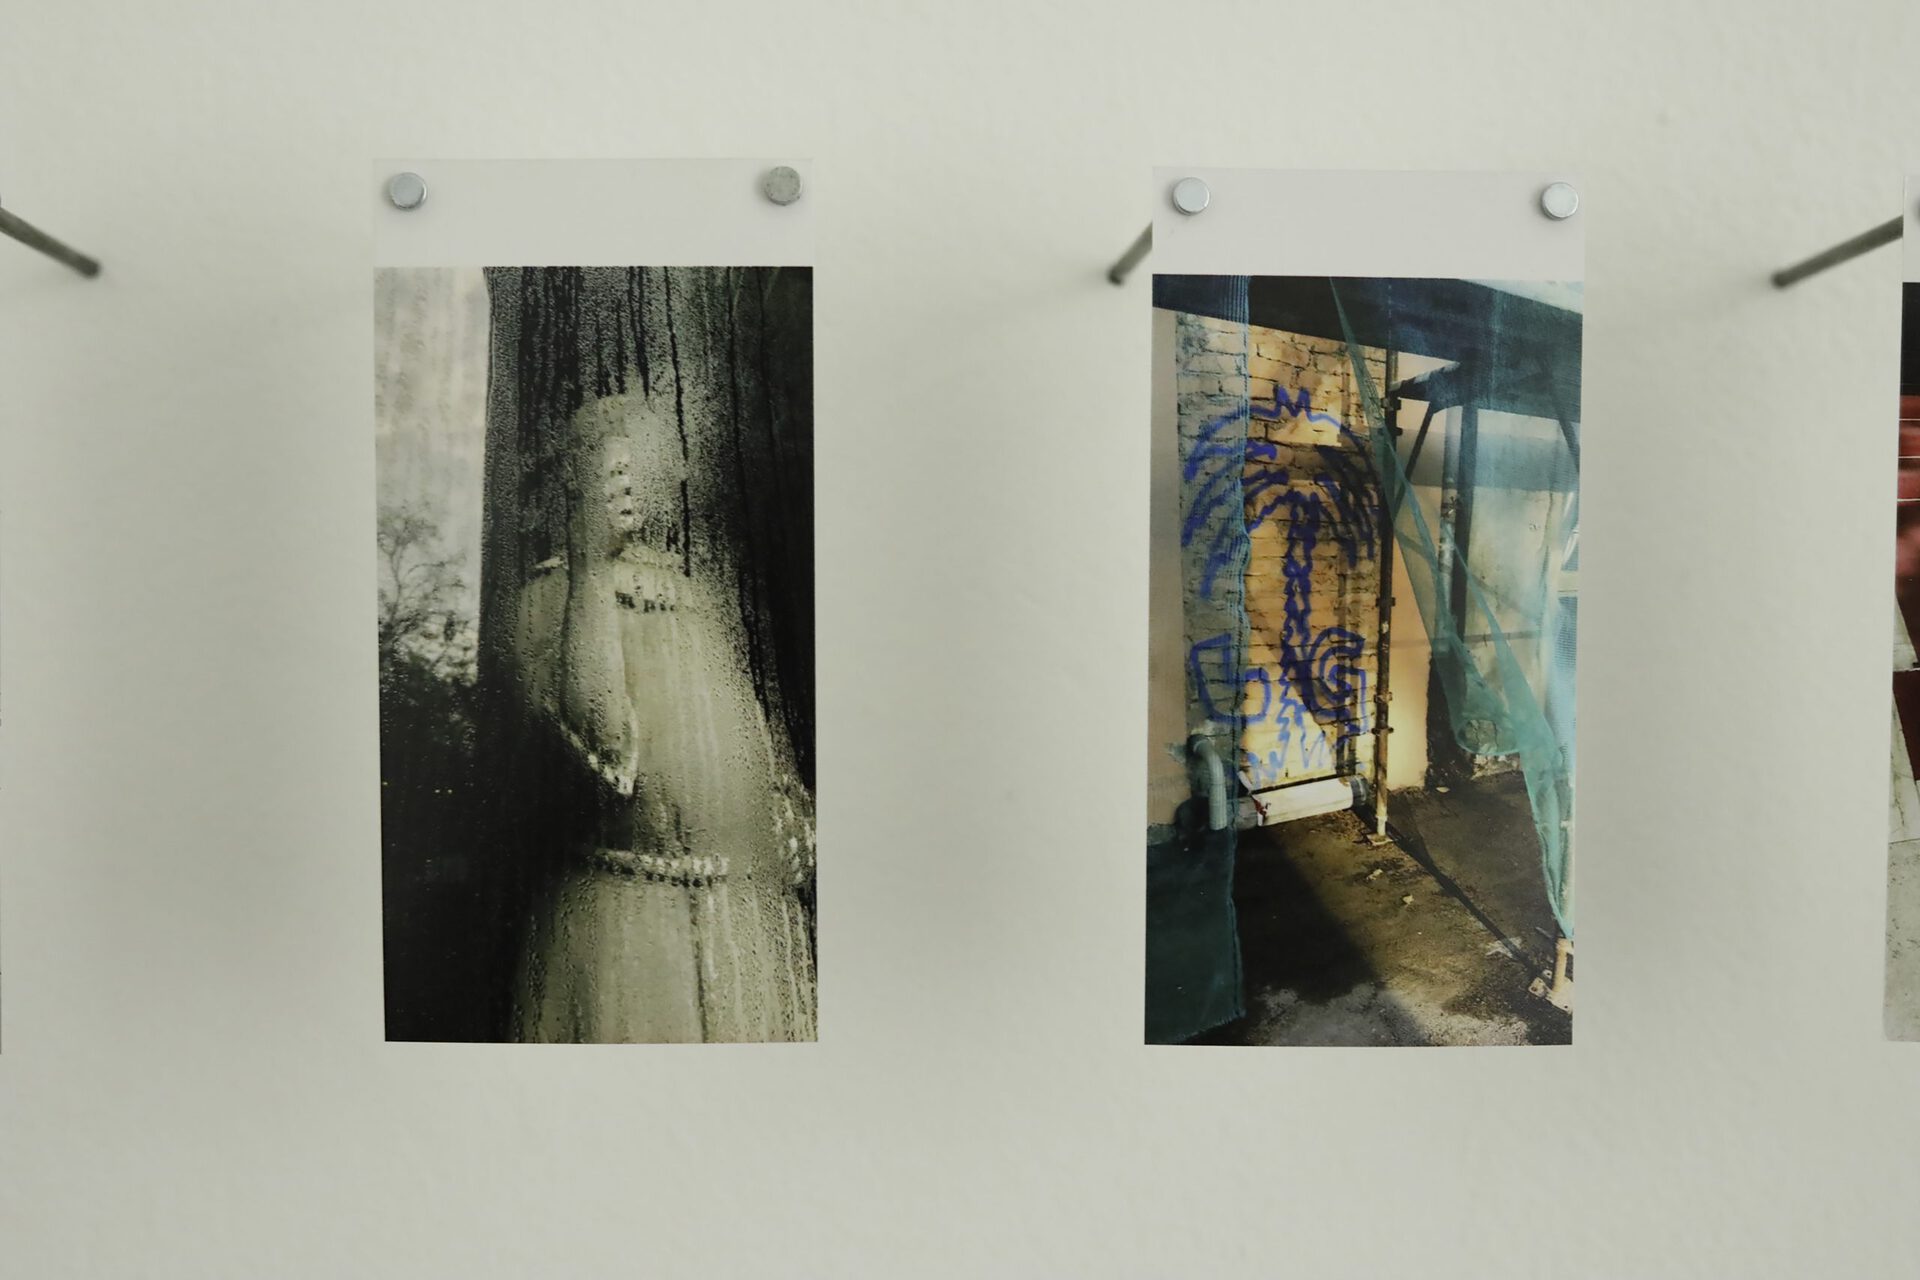 Isabell Alexandra Meldner, Elsewhere, From Behind the Glass, 2021, Series of 6 C-Prints, 10,5x6cm each, detail